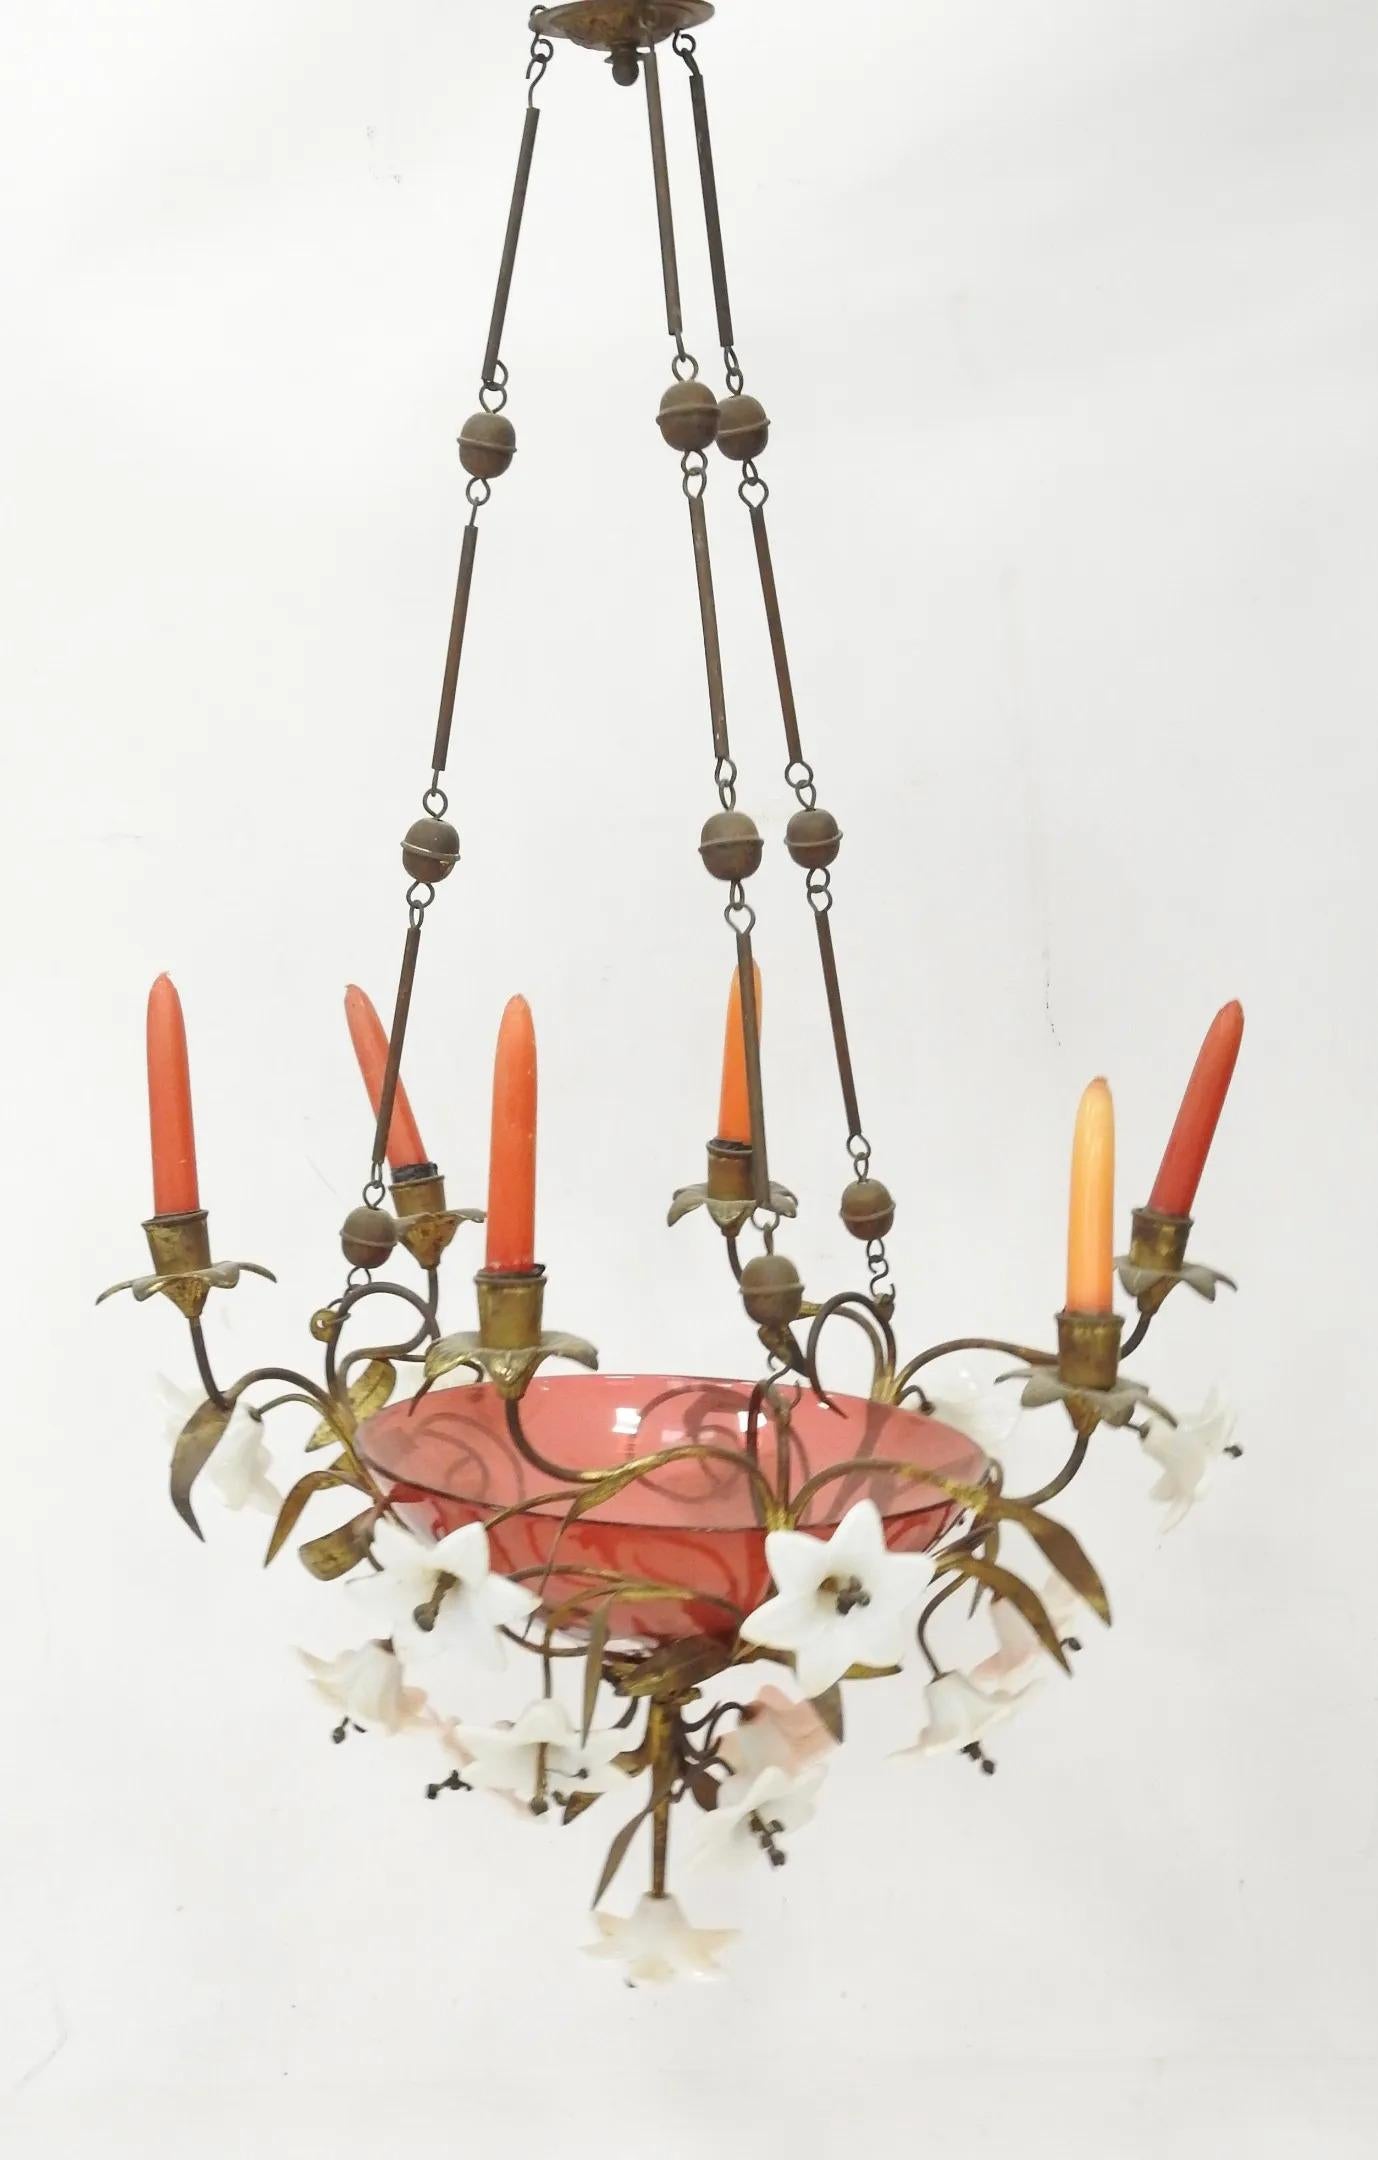 
charming pink and white glass chandelier, Napoleon III
NOT ELECTRIFIED
lighting candles